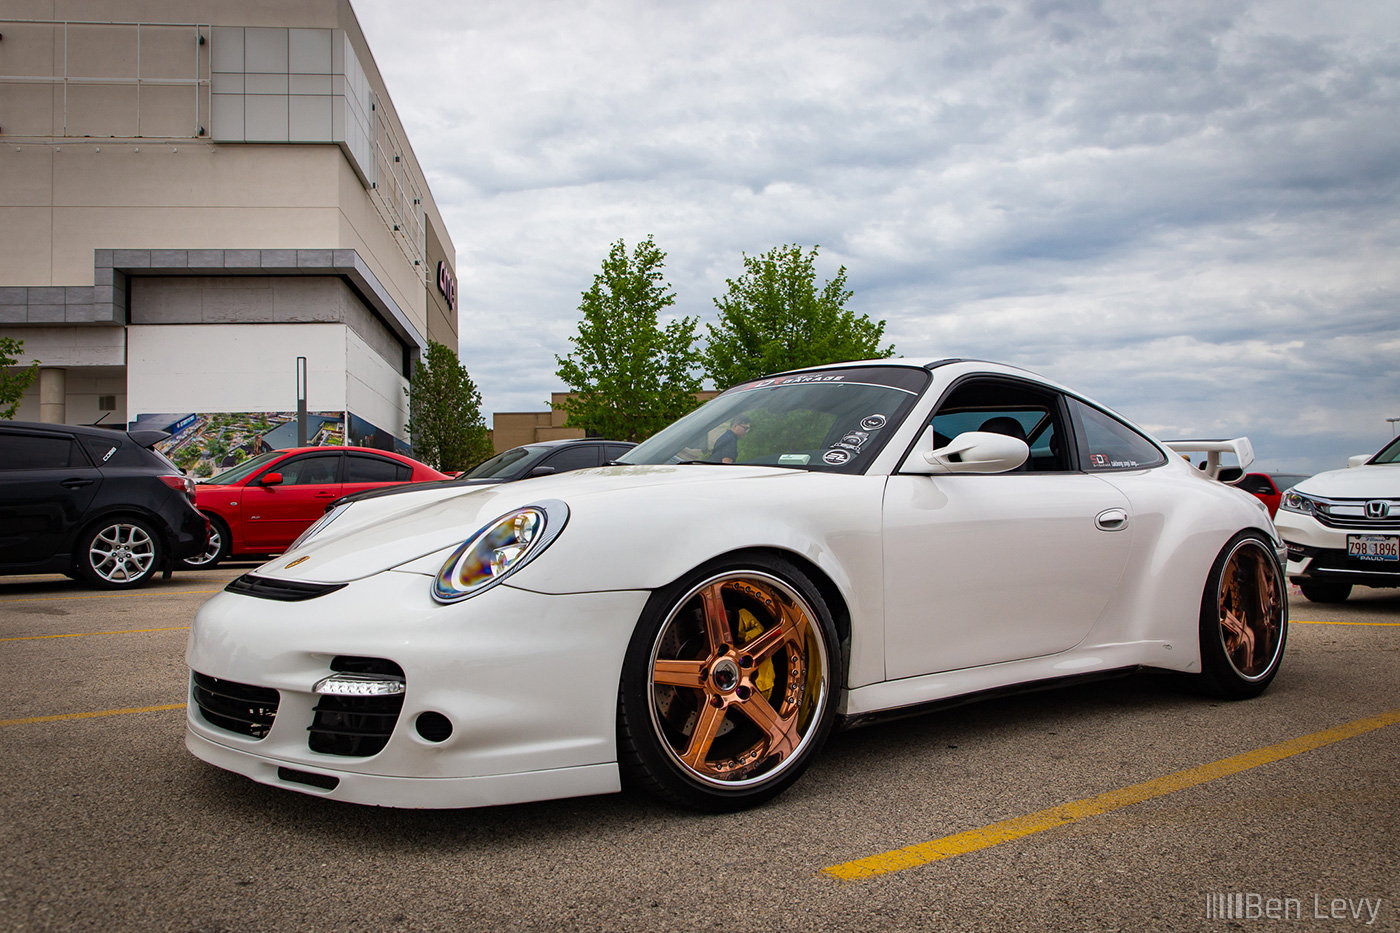 Widebody Porsche 911 at North Suburbs Cars & Coffee